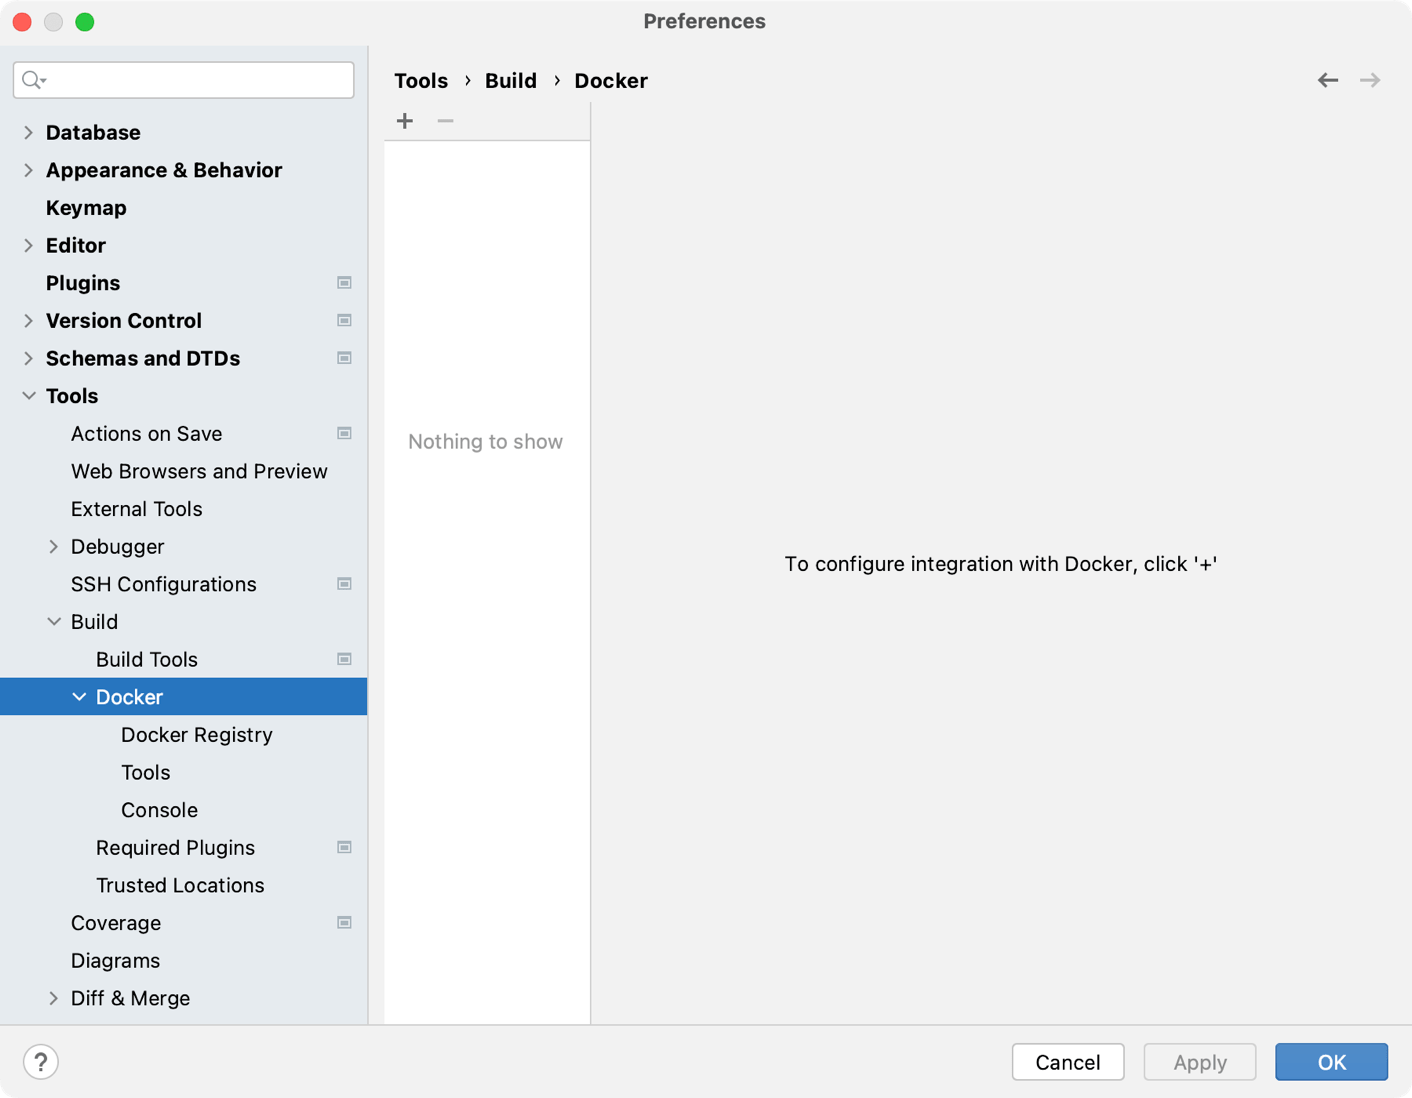 The Docker connection settings